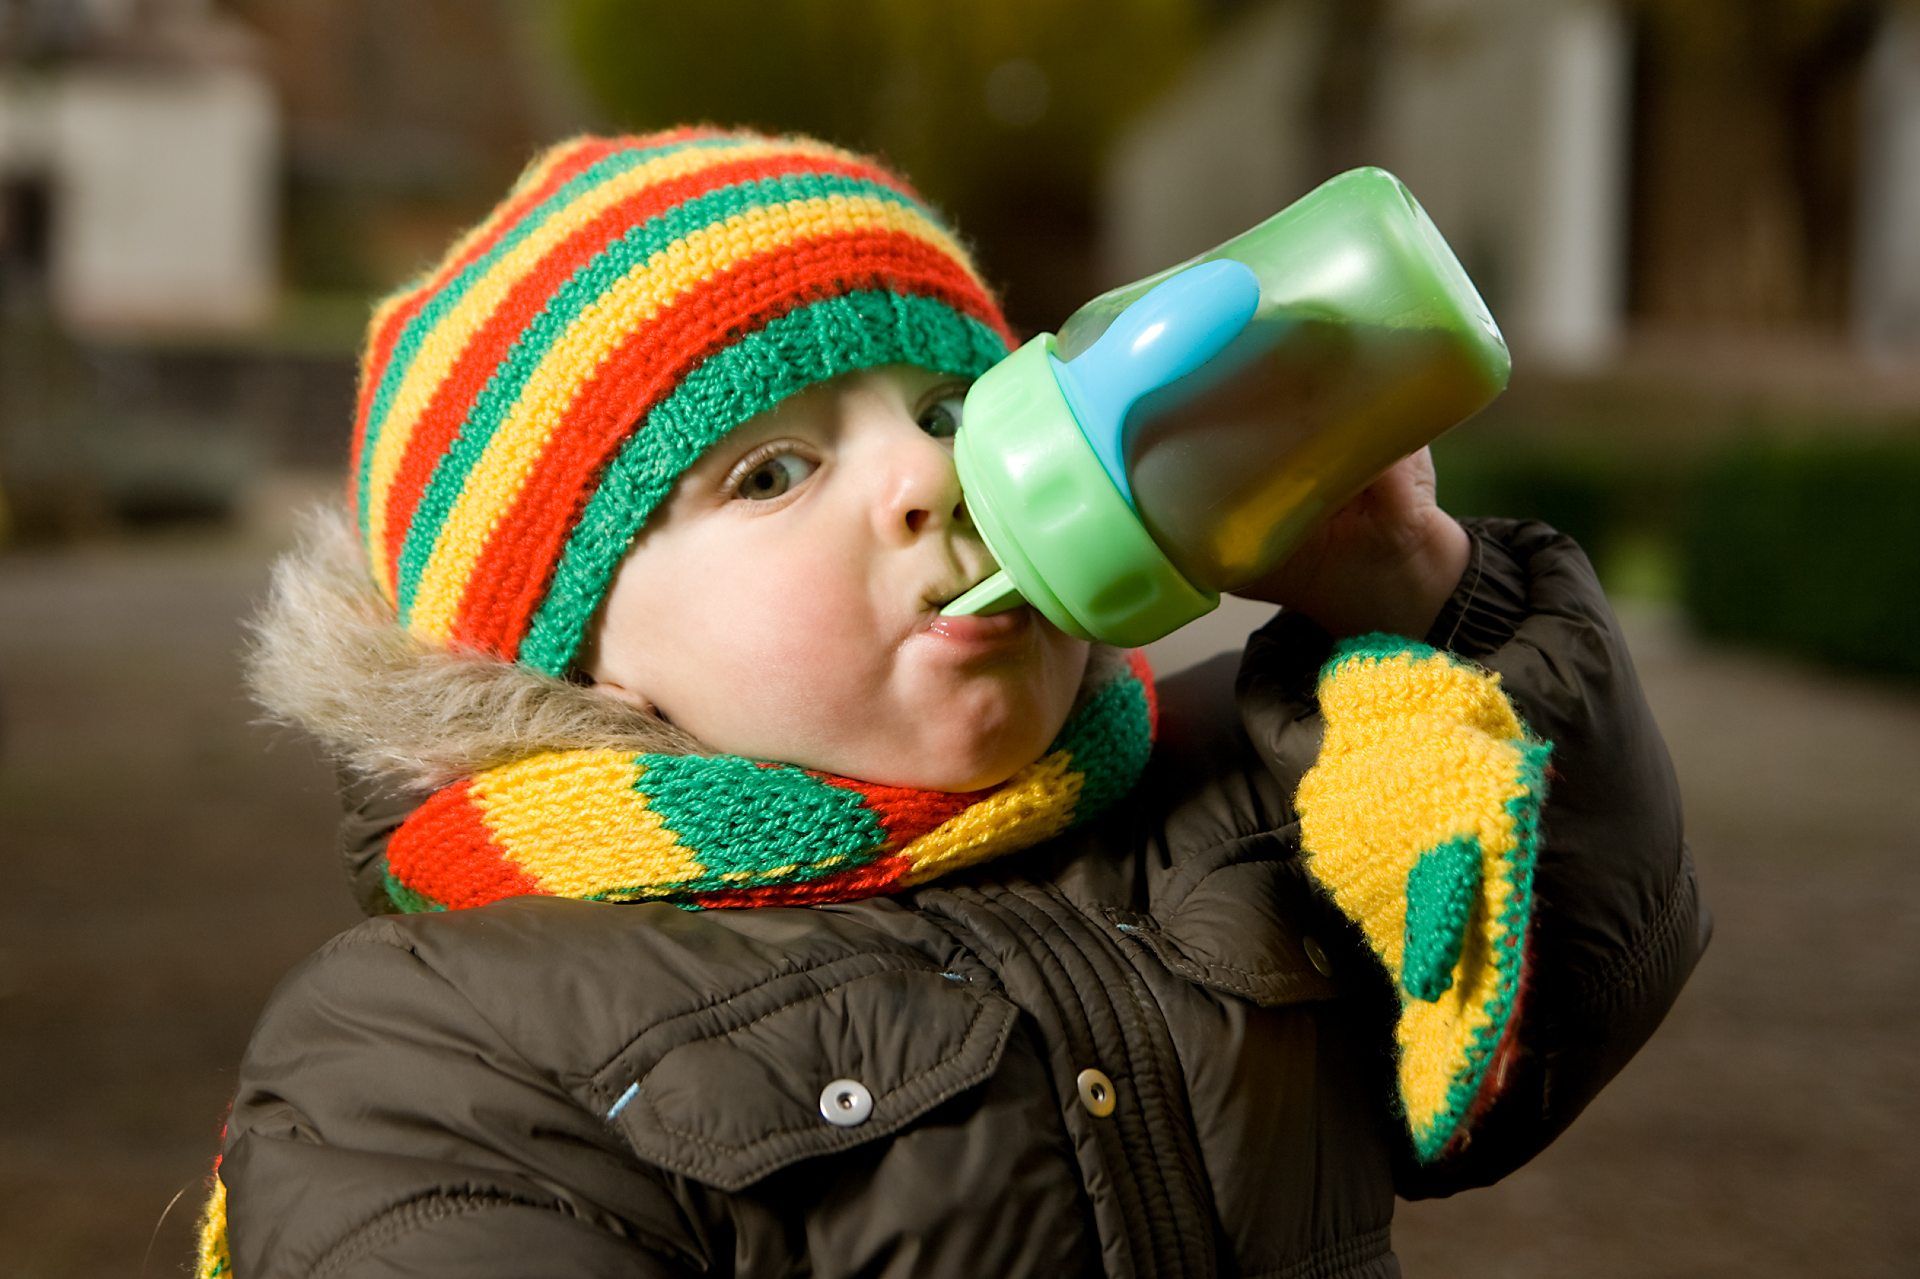 A toddler in a winter coat and colorful cap drinks from a sippy cup - Similac Go & Grow Toddler Drink